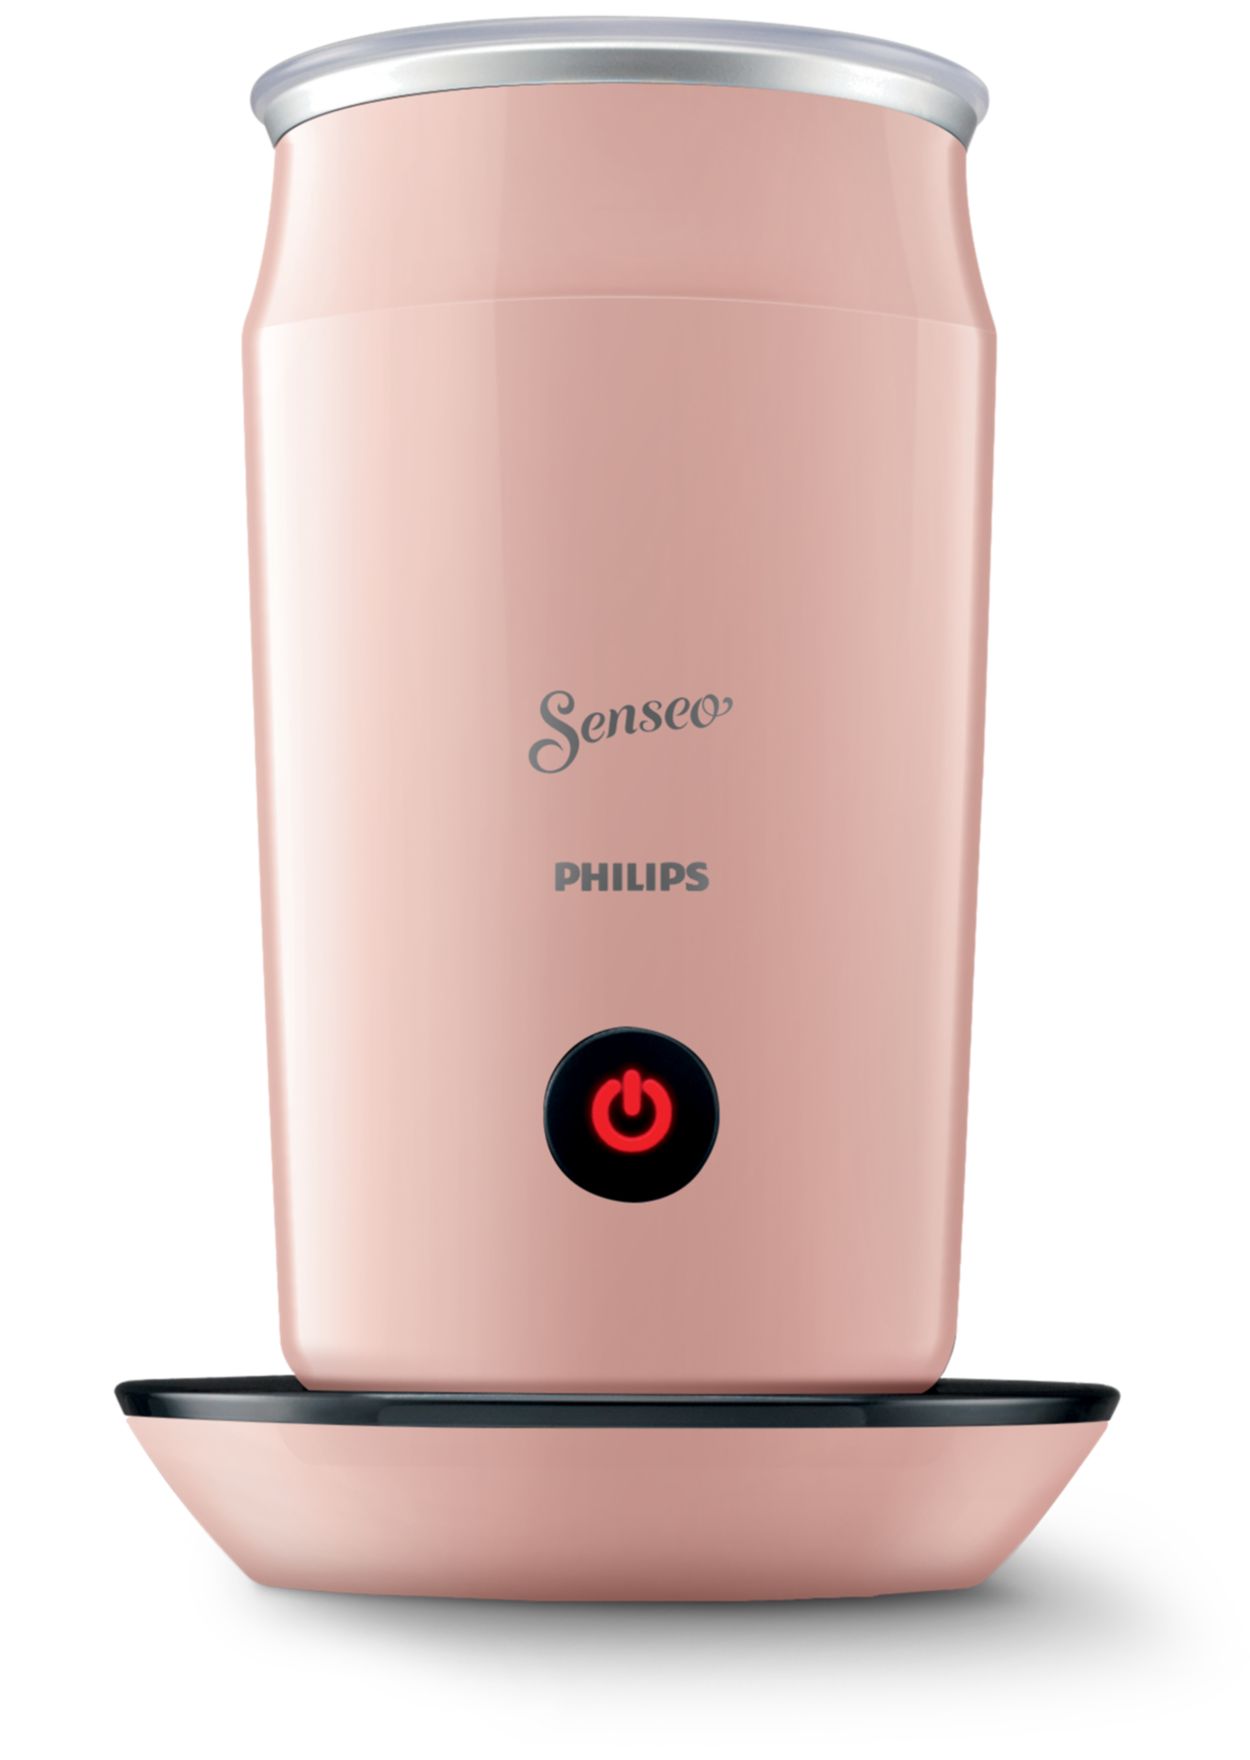 https://images.philips.com/is/image/philipsconsumer/d76bed0a4b2a49e89b9dad2501035d2d?$jpglarge$&wid=1250